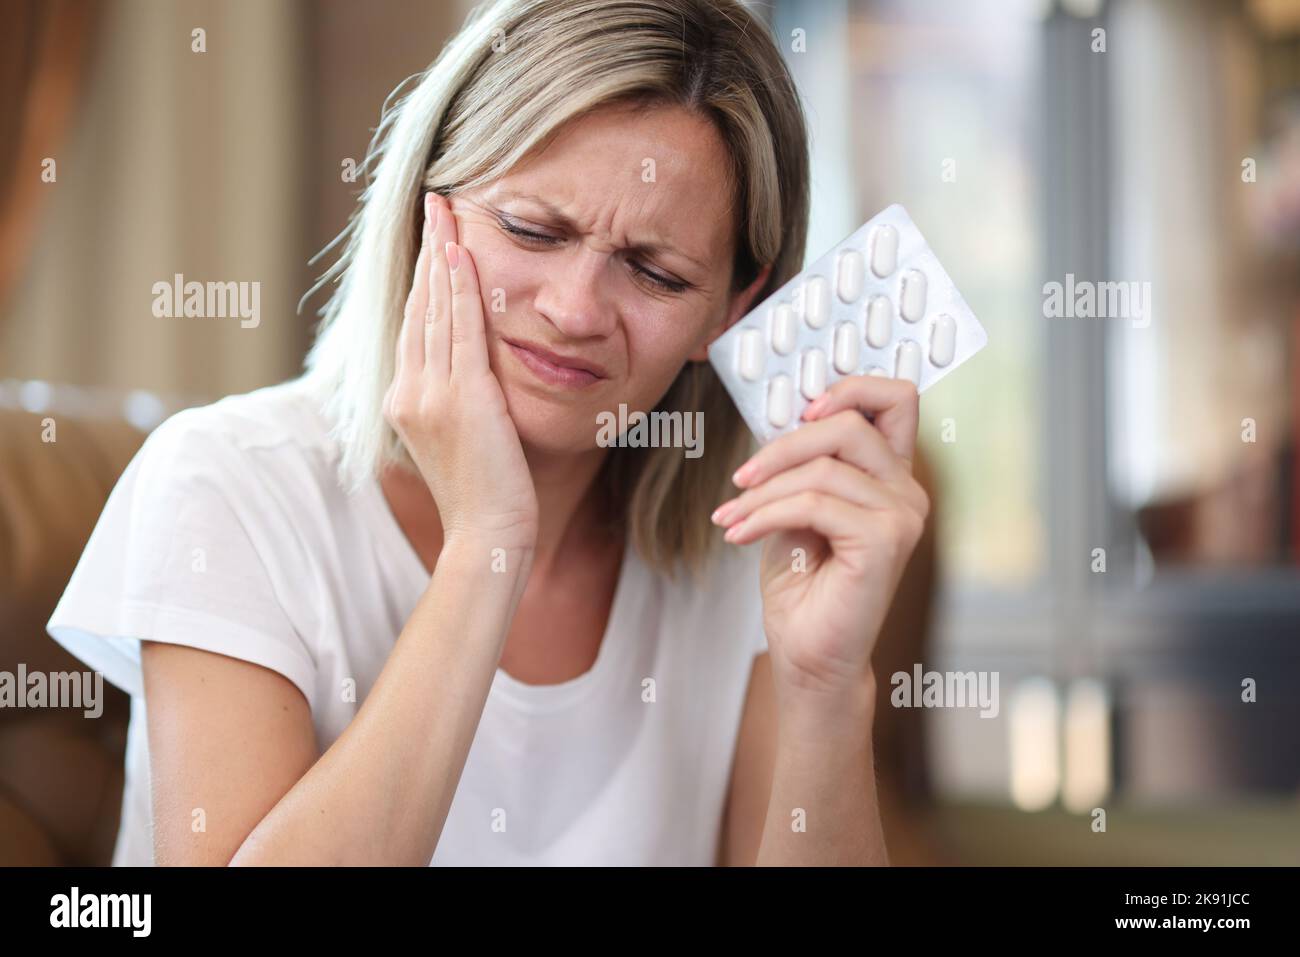 Young woman suffering from tooth pain and holding blister of pills Stock Photo